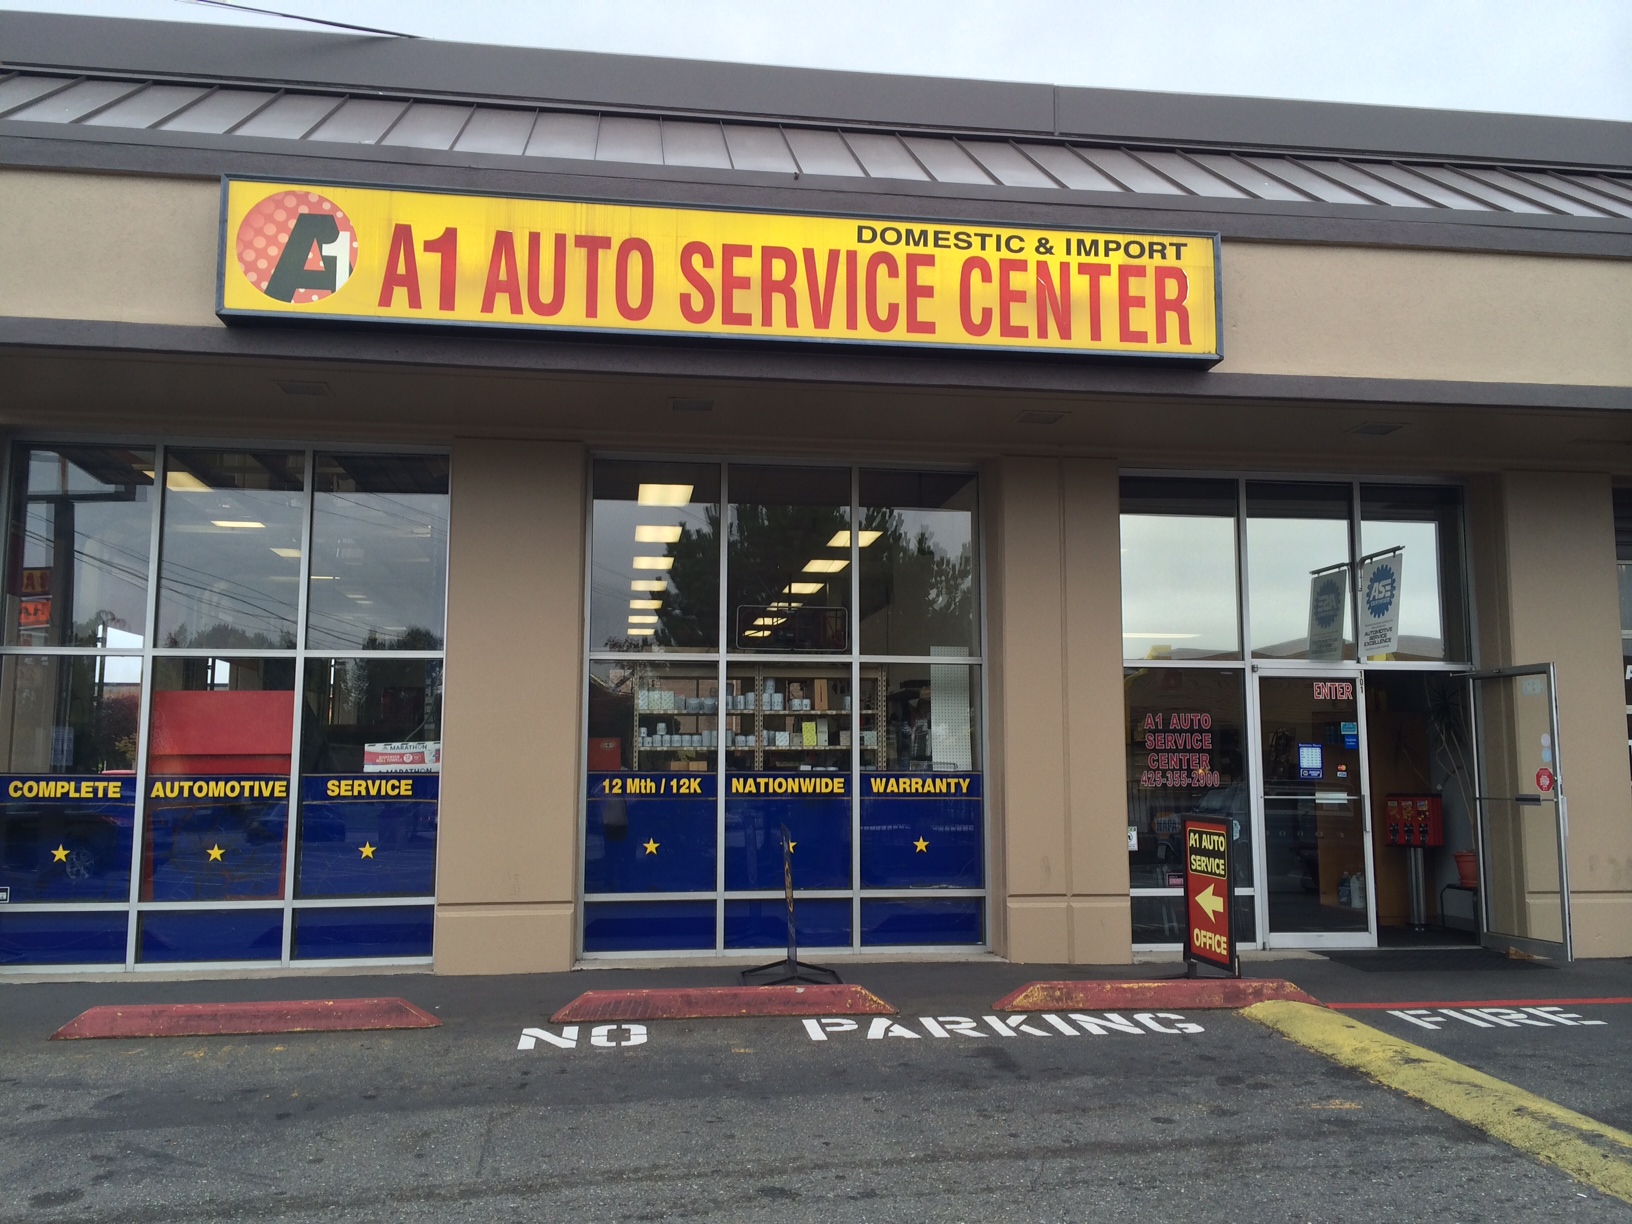 A1 Auto Service Center Coupons near me in Everett, WA ...